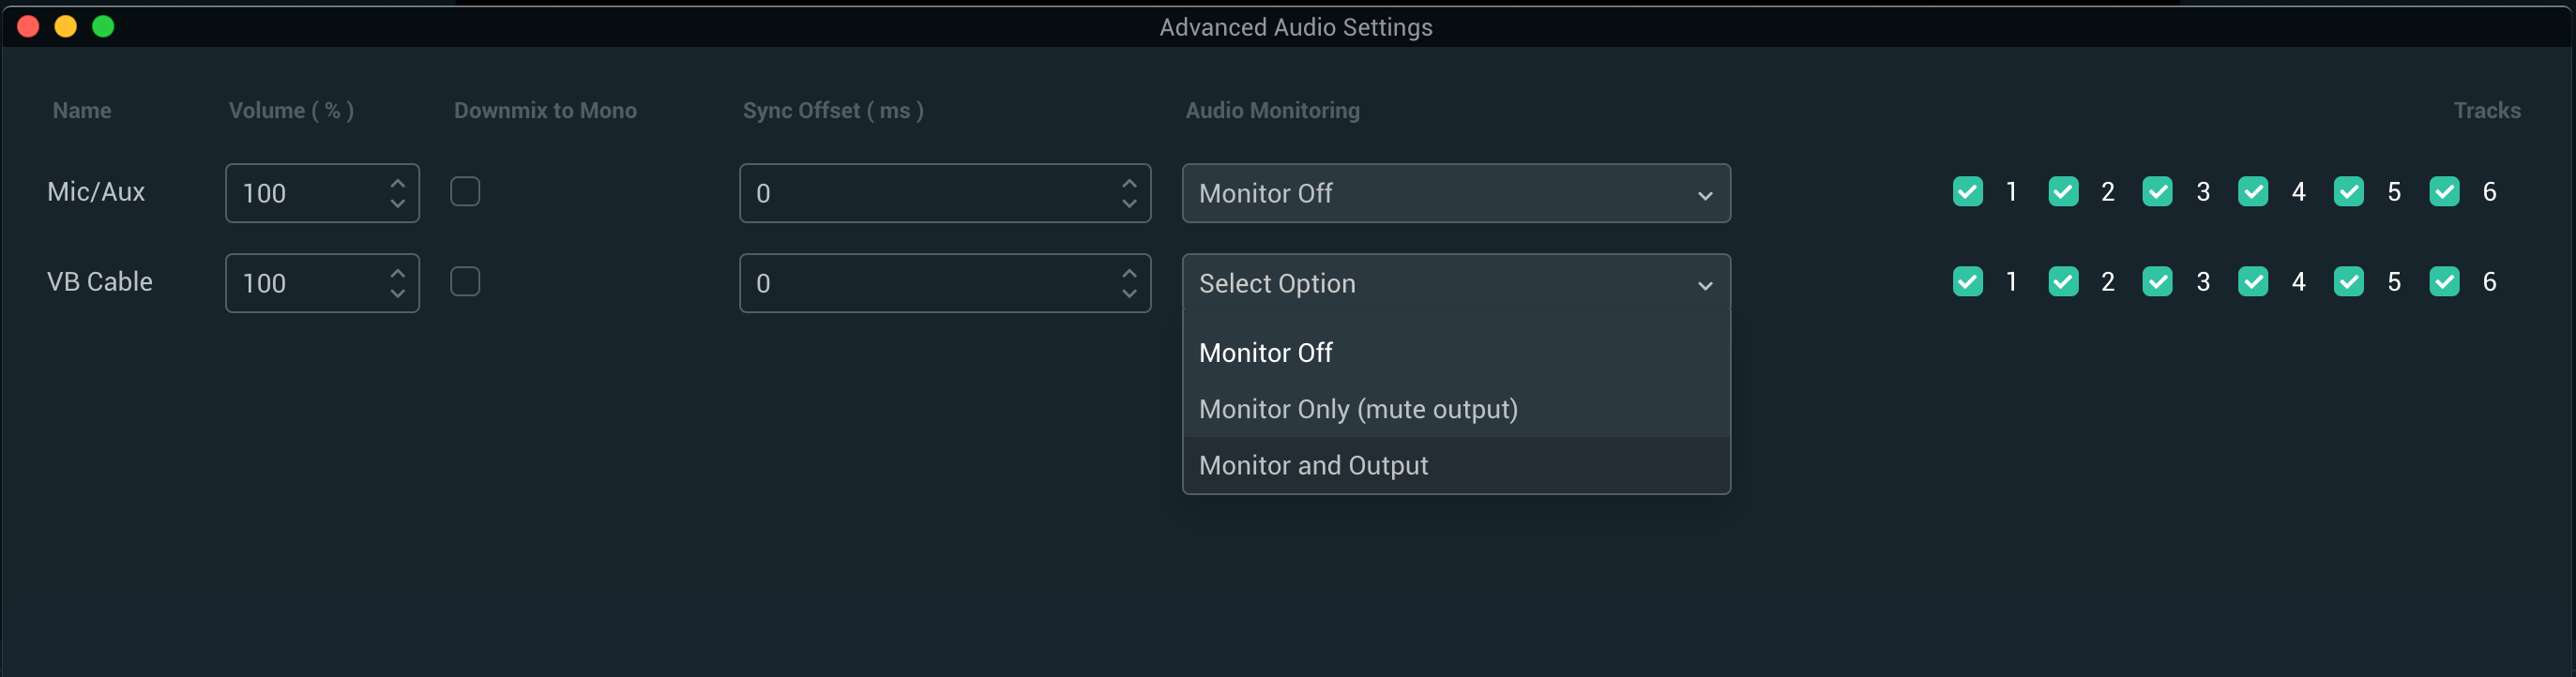 How To Live Stream Using Discord Audio In Streamlabs Obs By Brady Endres Medium